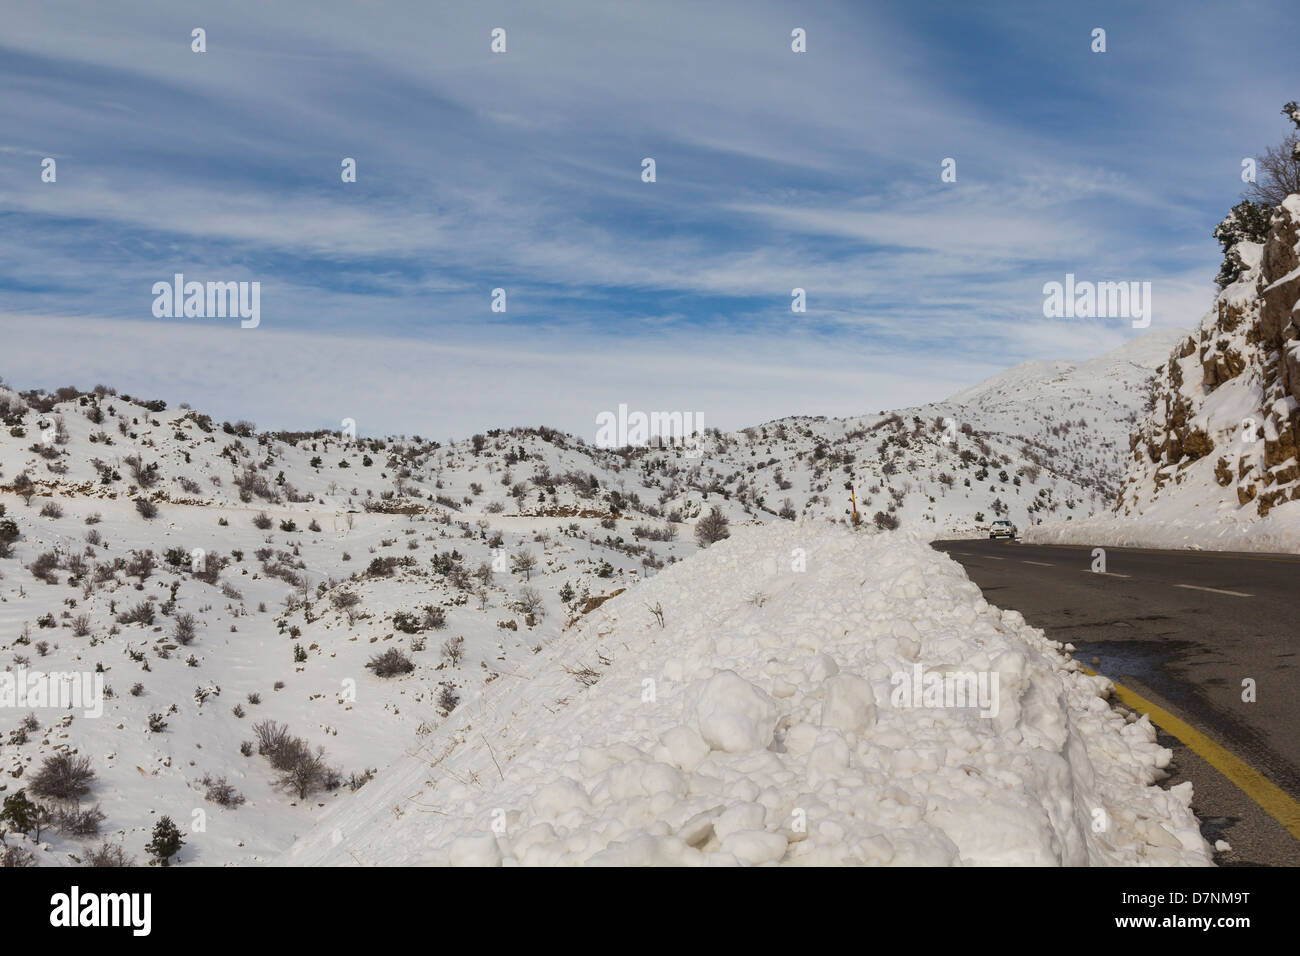 Mount Hermon in the snow with expensive receding into the distance, Israel Stock Photo